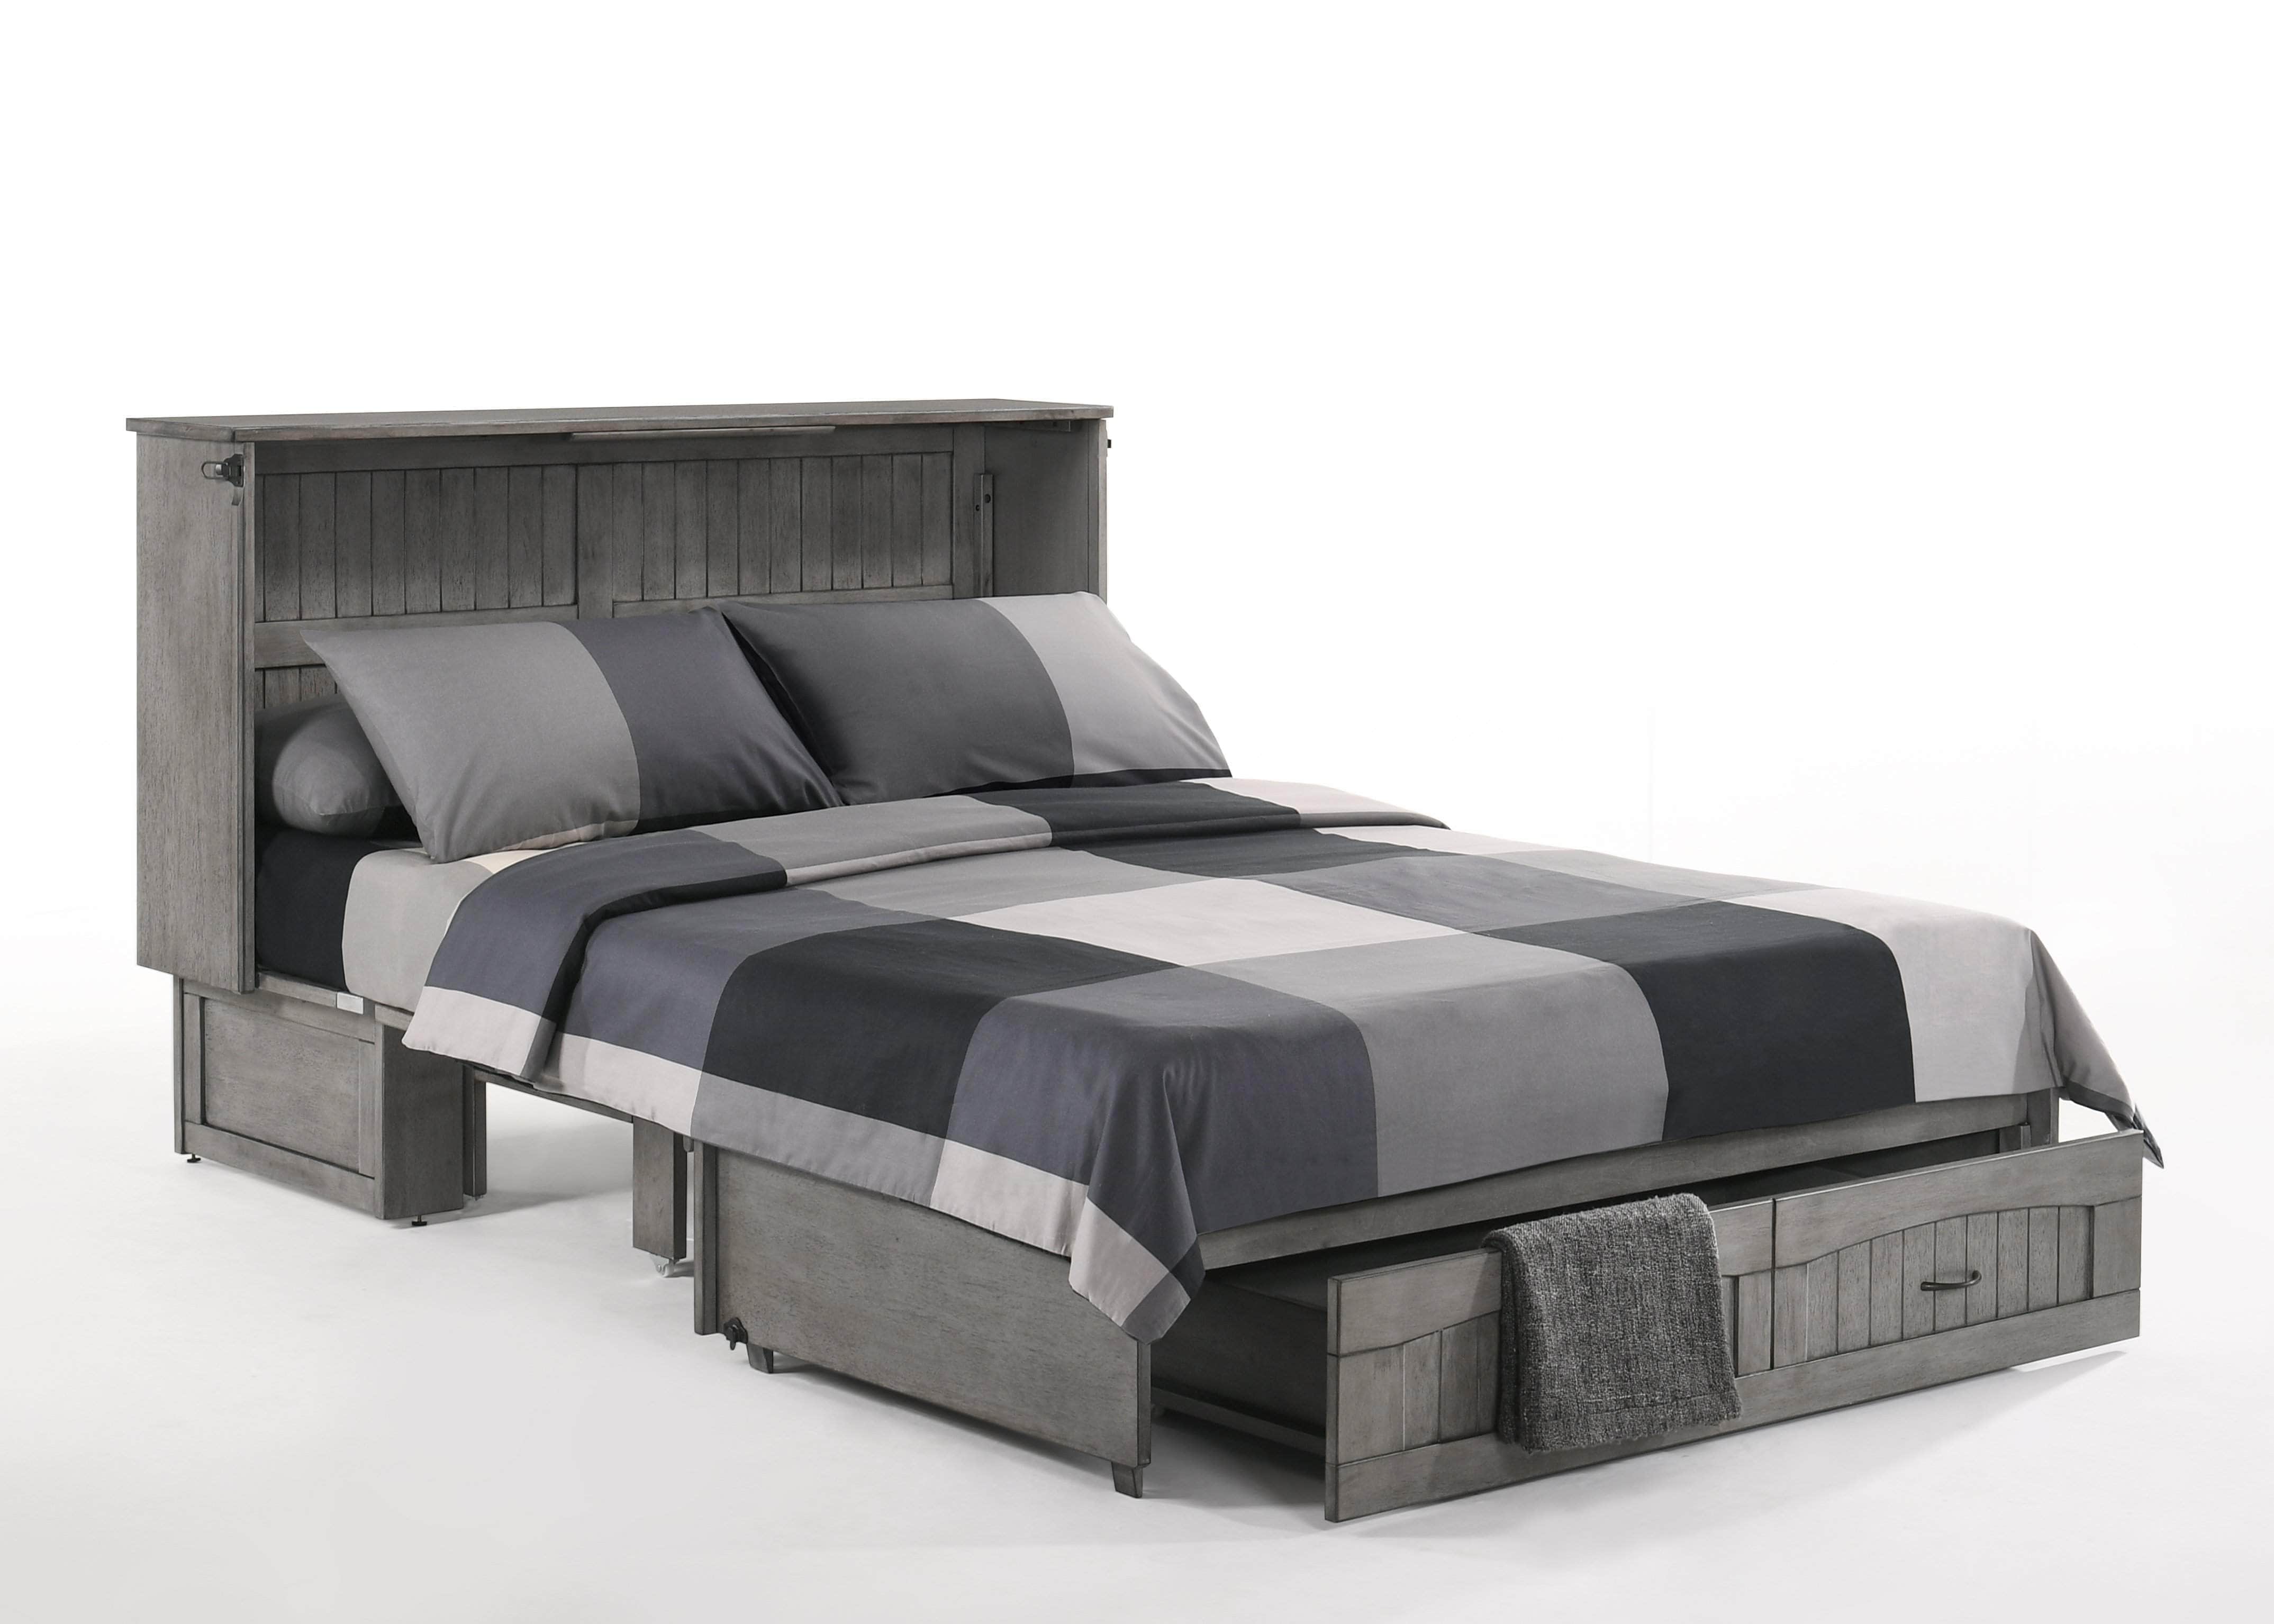 IQ Furniture Murphy Cabinet Bed Rustic Grey Alpine Murphy Cabinet Bed with Queen Gel Memory Foam Mattress - Available in 2 Colours